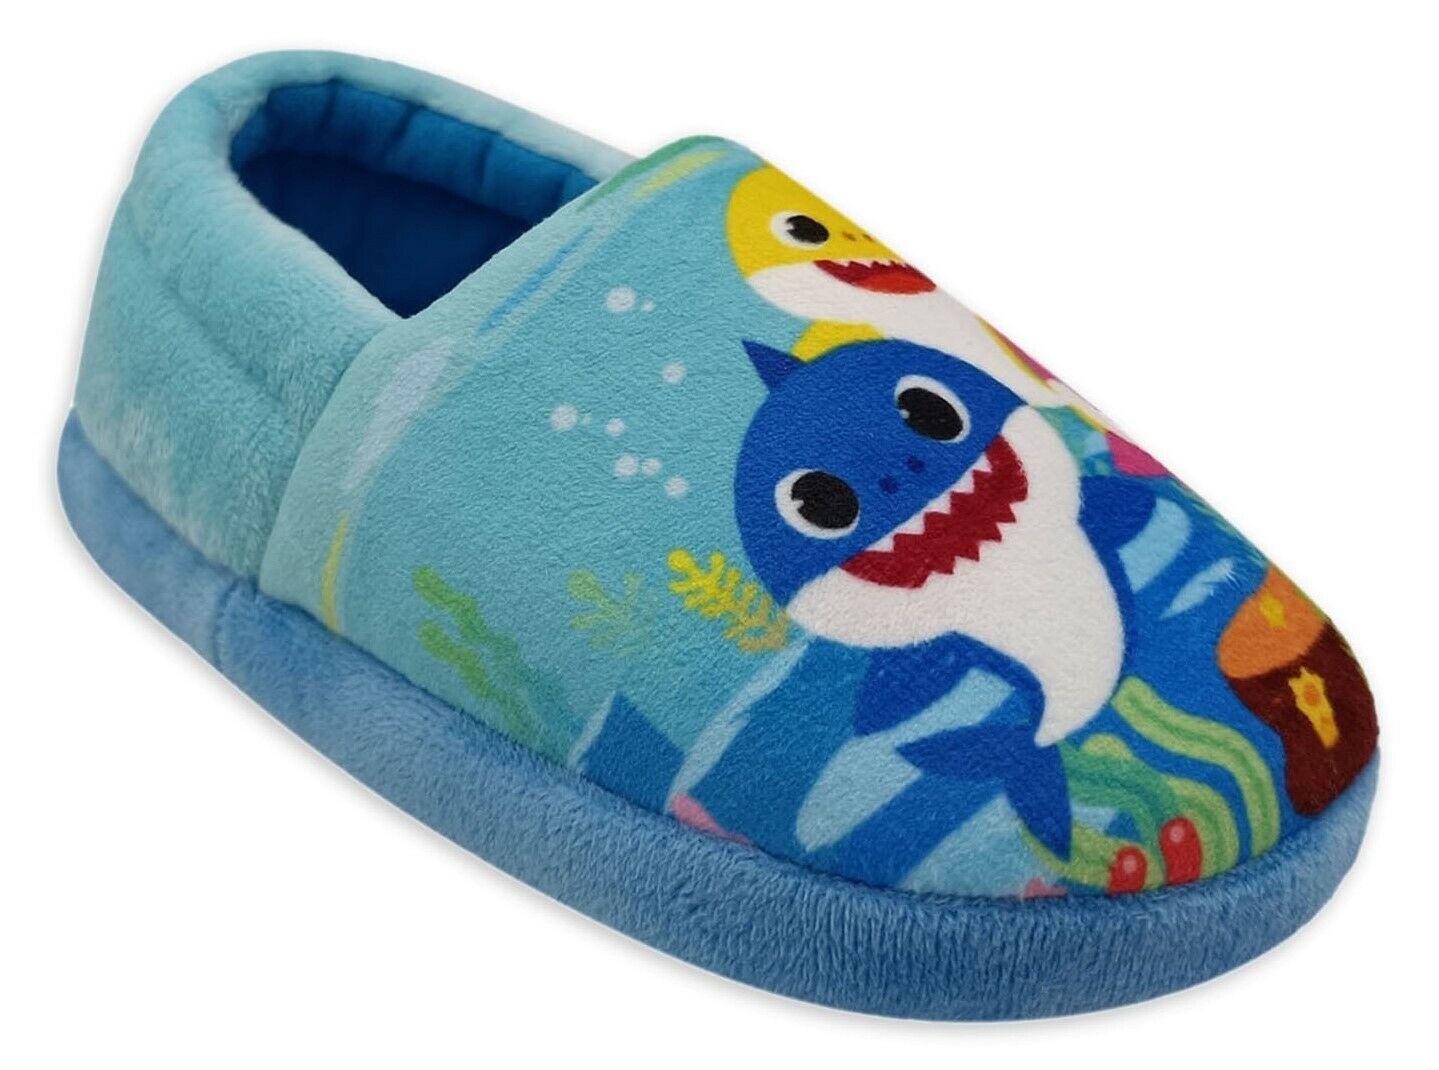 BABY MOMMY & DADDY SHARK PINKFONG Plush Slippers House Shoes Boys Size 11-12 NWT